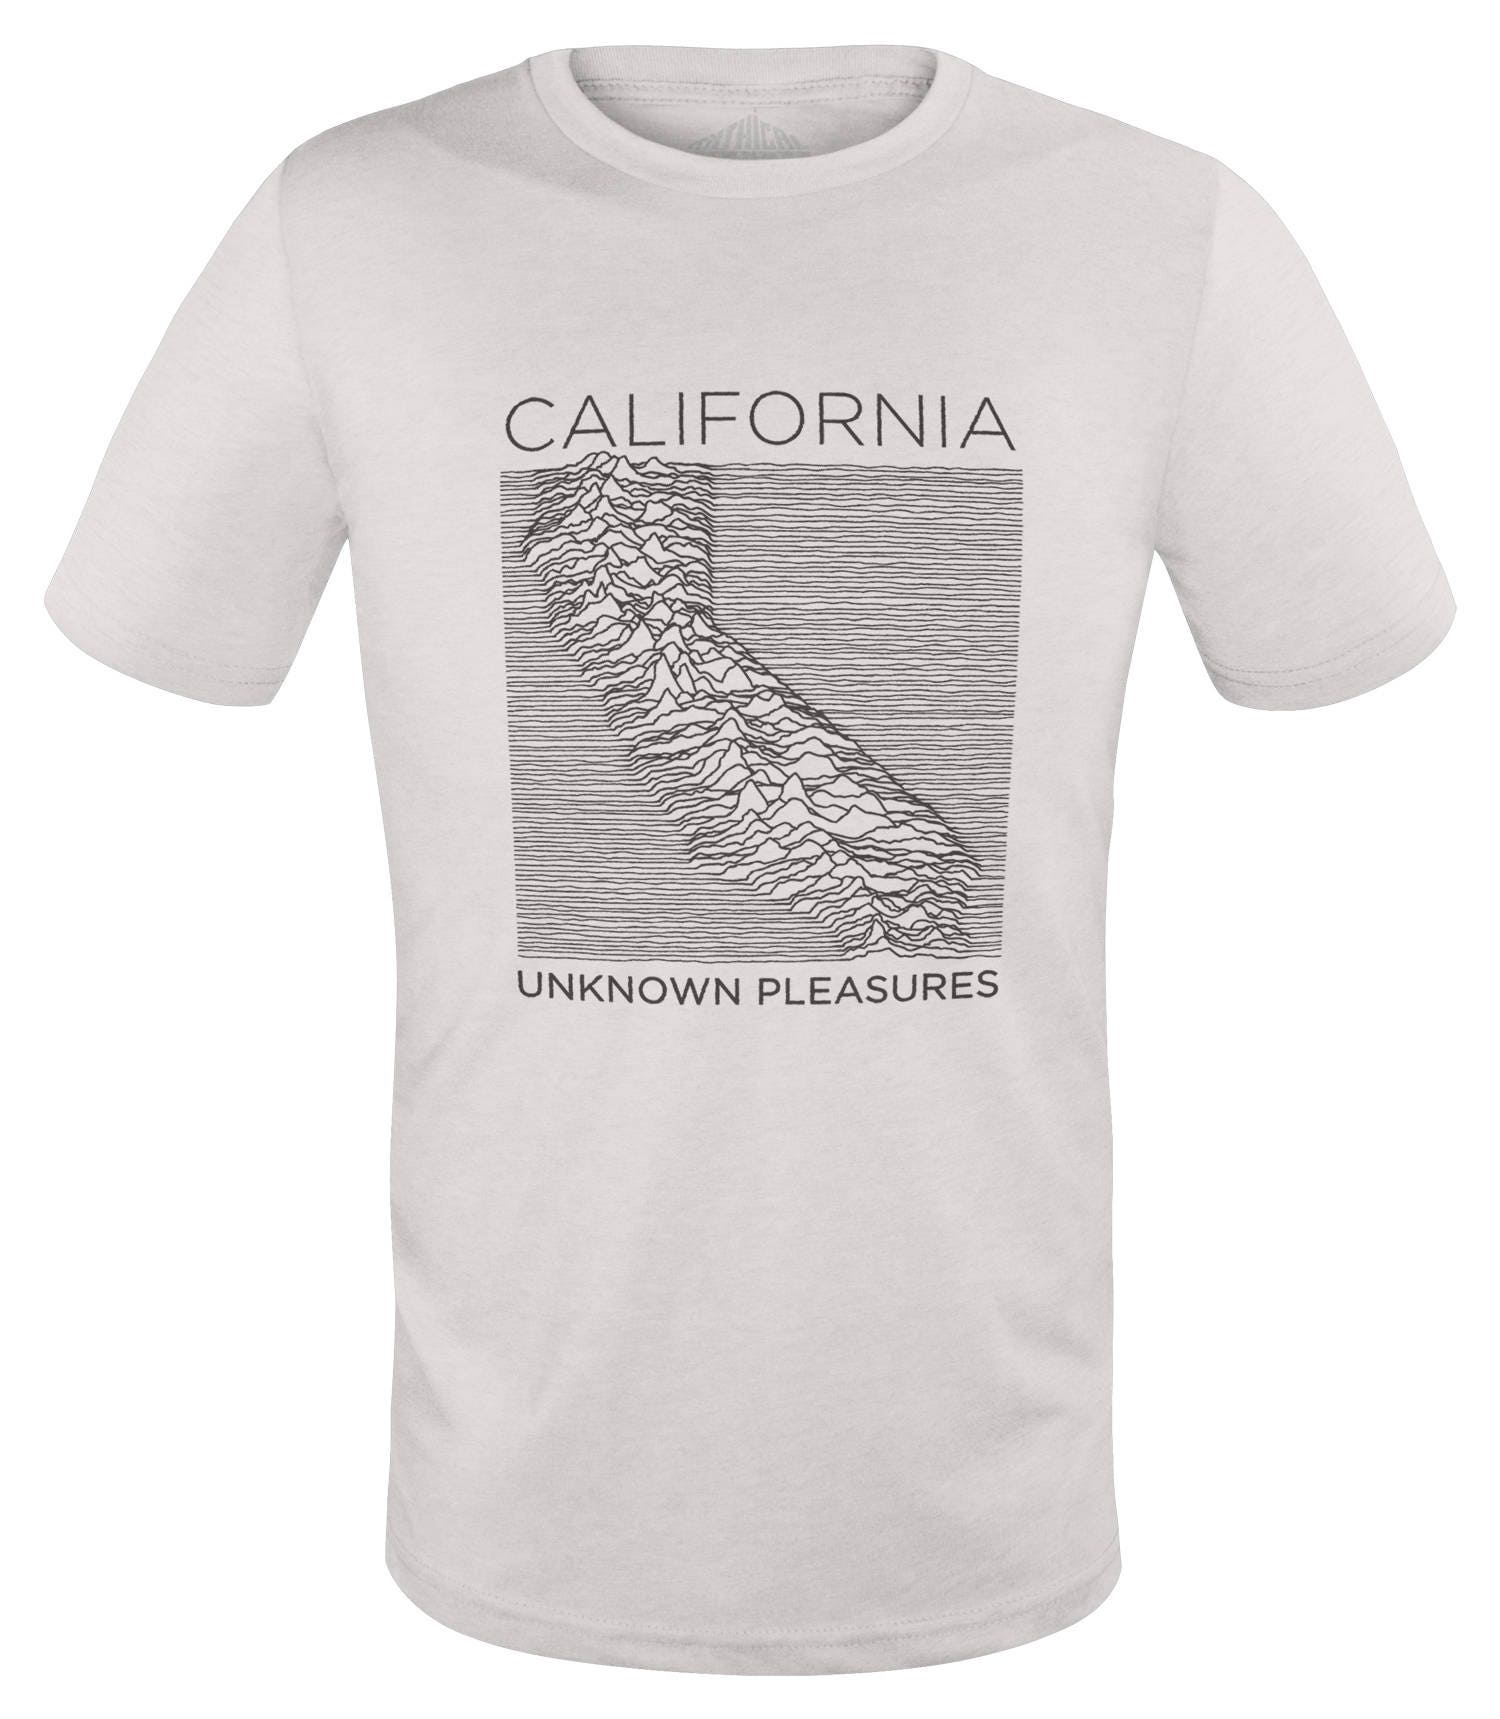 Discover California State - Joy Division - T-Shirt